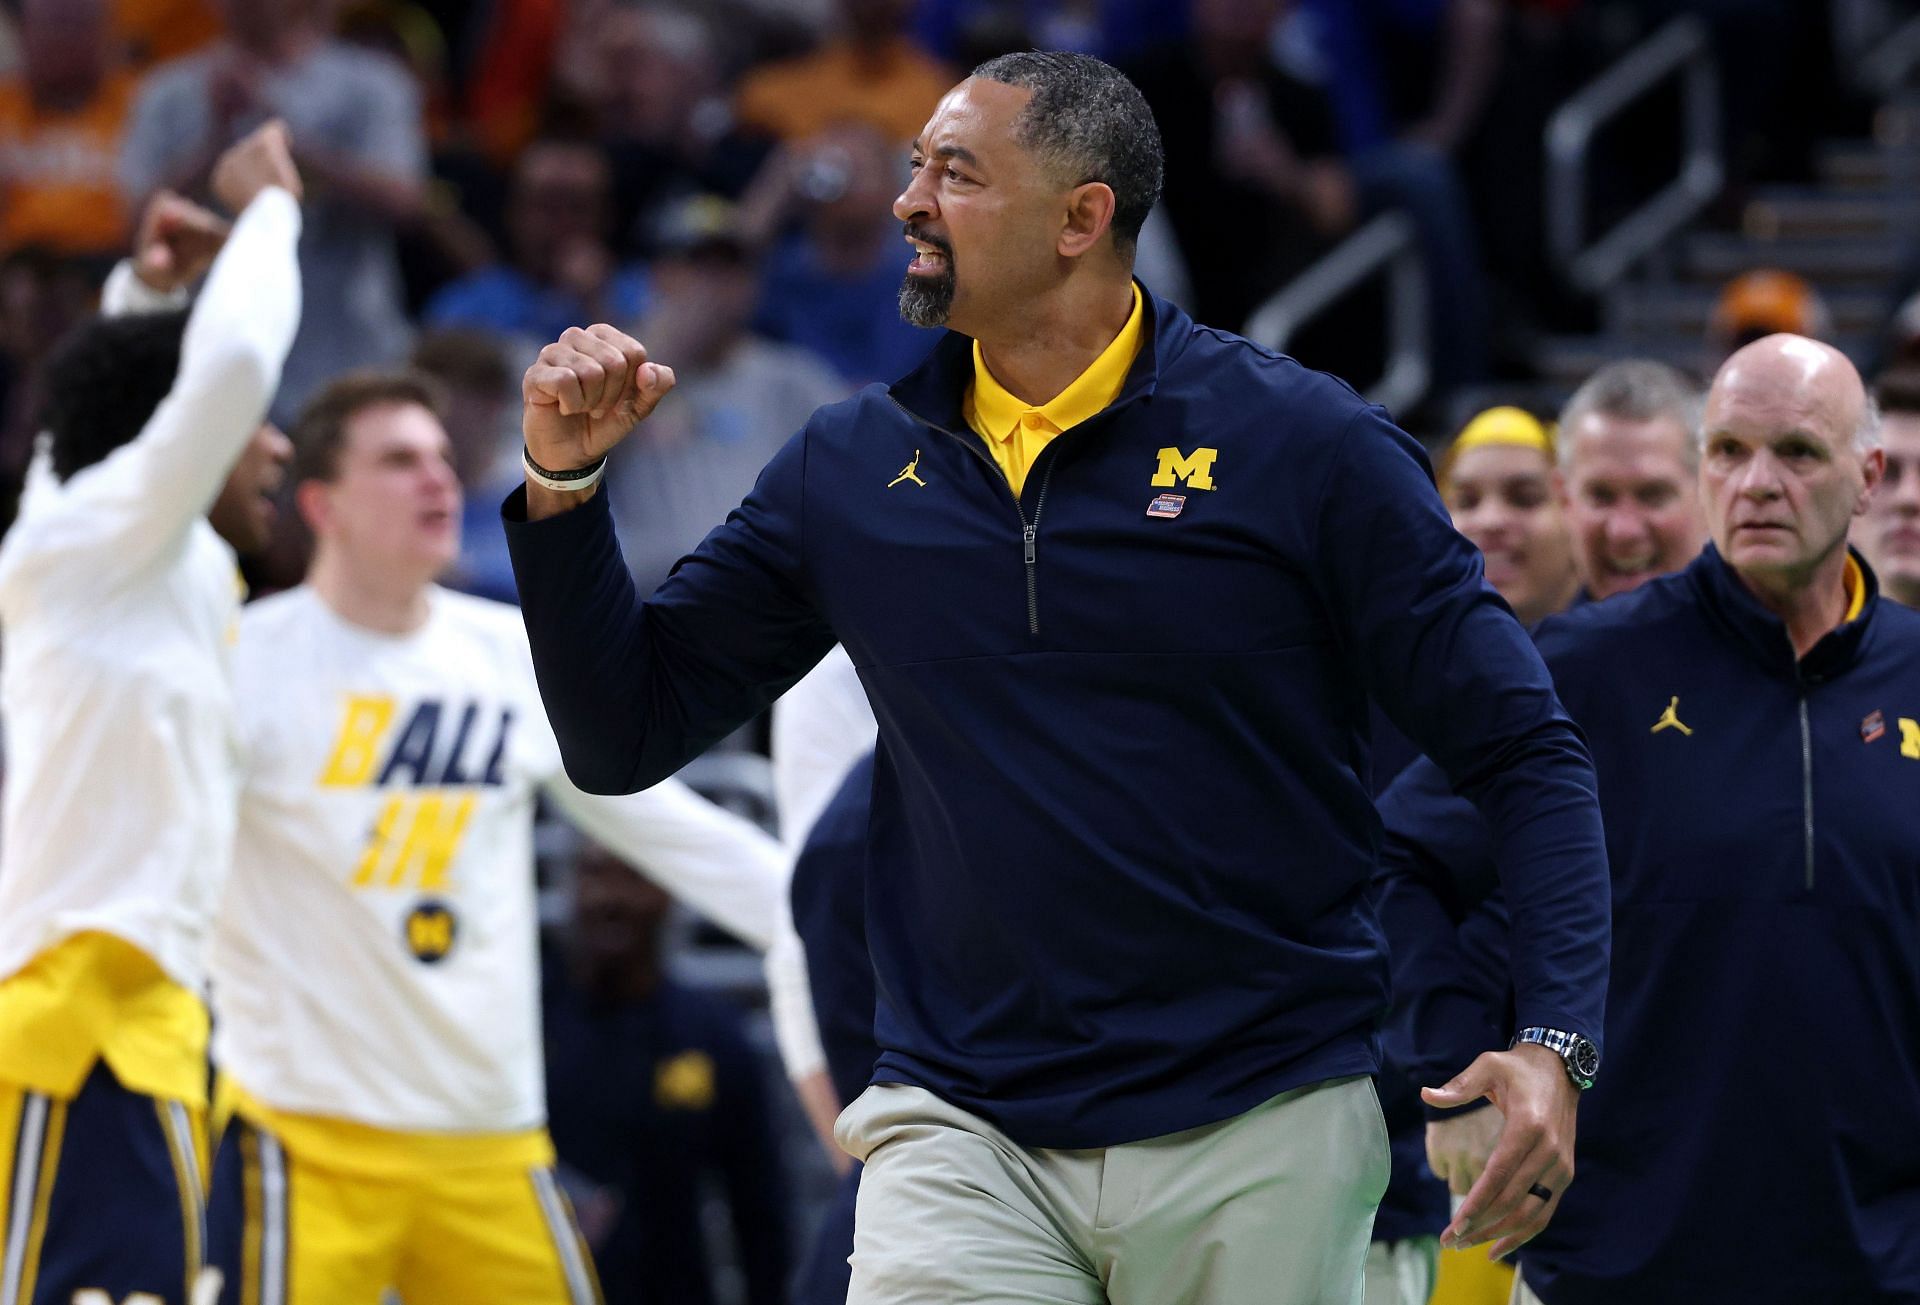 Juwan Howard and Michigan took a tough season and made the most of it.